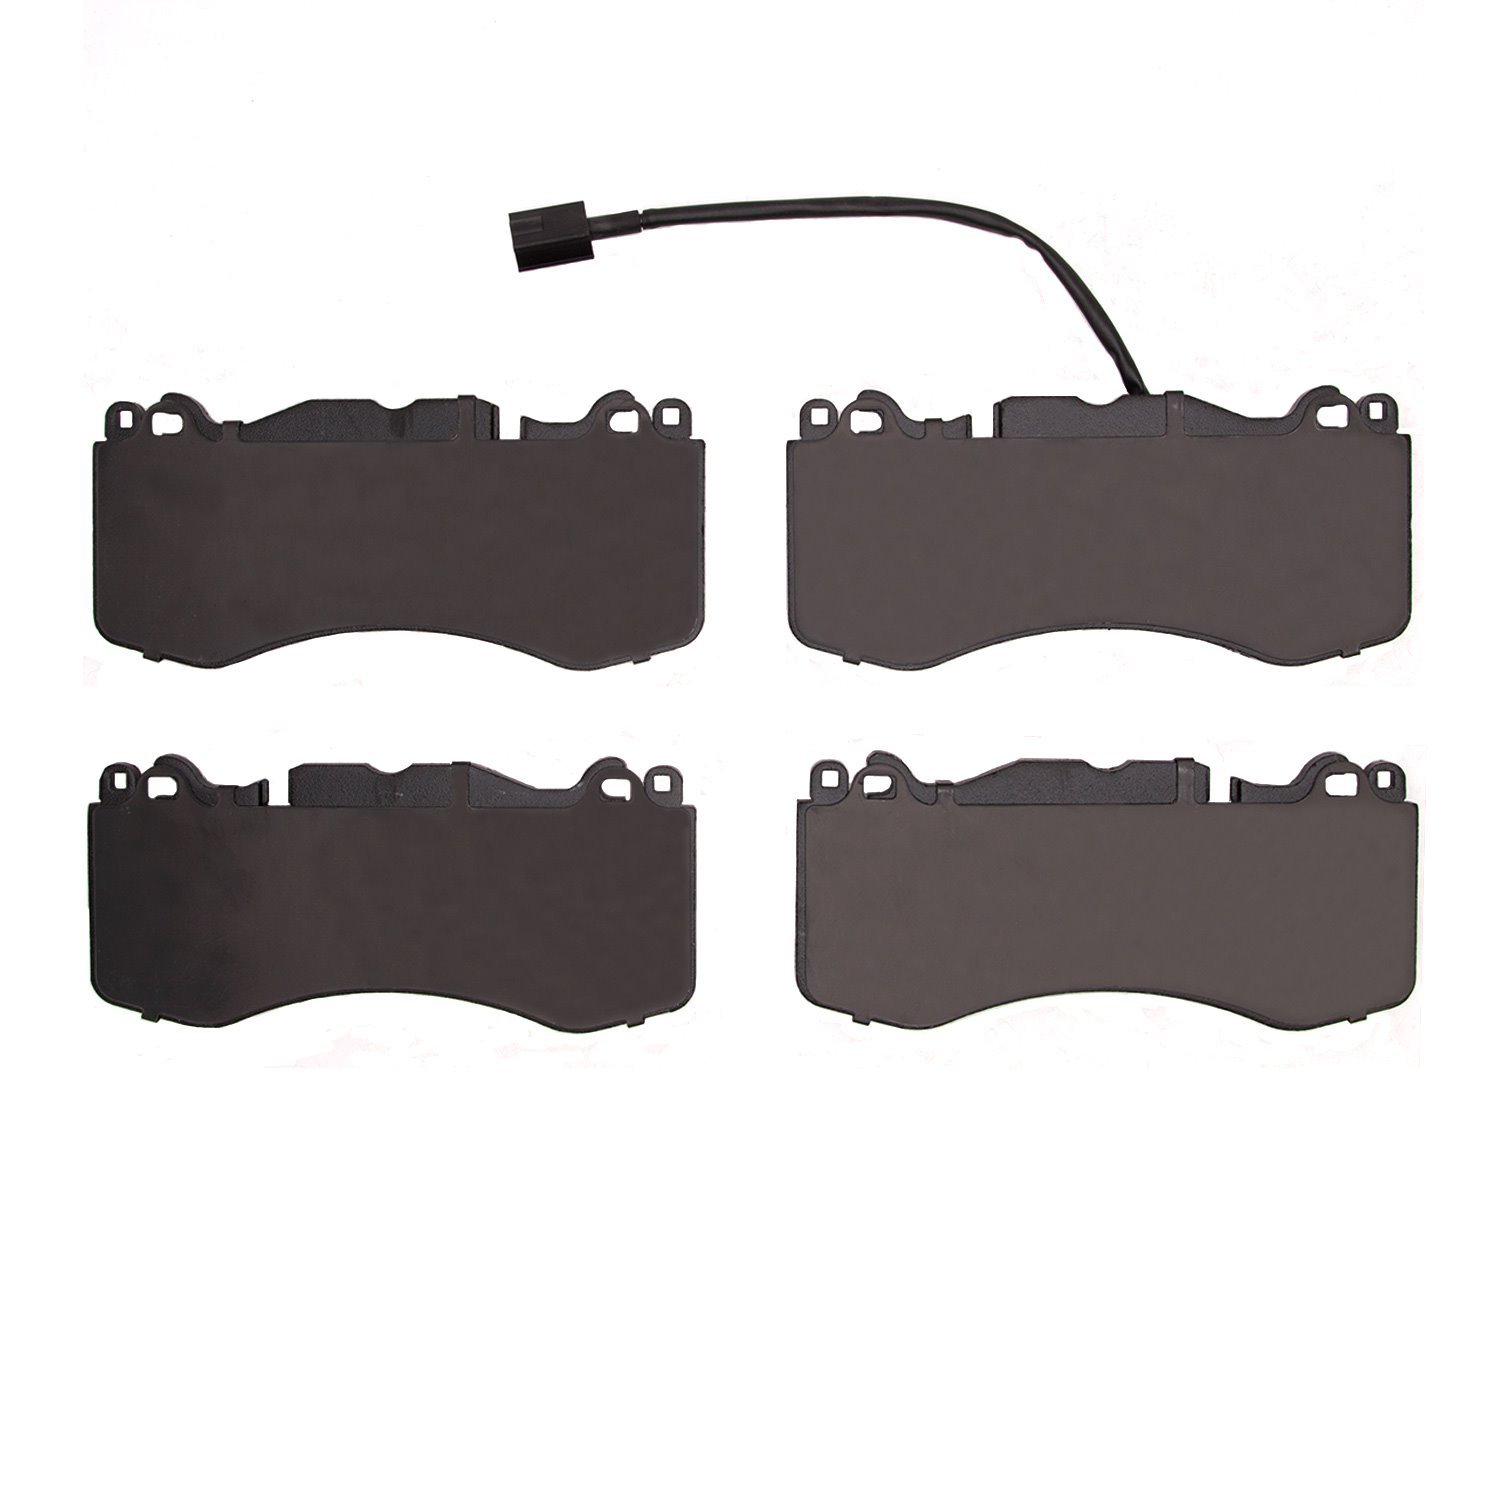 1551-1990-00 5000 Advanced Low-Metallic Brake Pads, Fits Select Multiple Makes/Models, Position: Front